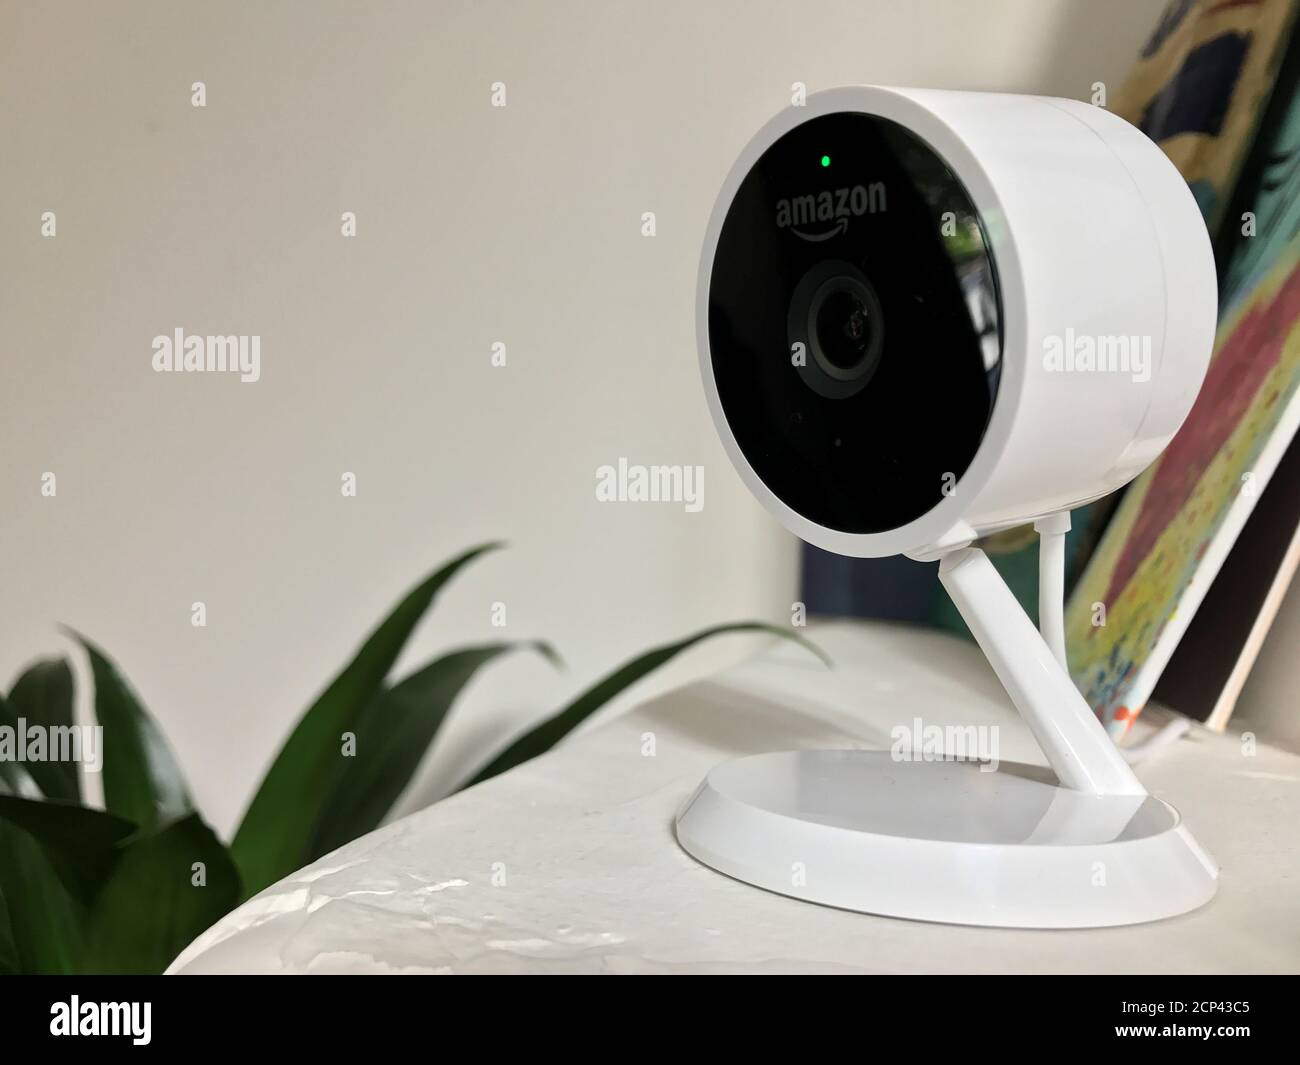 An Amazon "Cloud Cam," part of the online retailer's kit enabling in-home  delivery, is seen in San Francisco, California, U.S., October 24, 2017.  Photo taken October 24, 2017. REUTERS/Jeffrey Dastin Stock Photo - Alamy